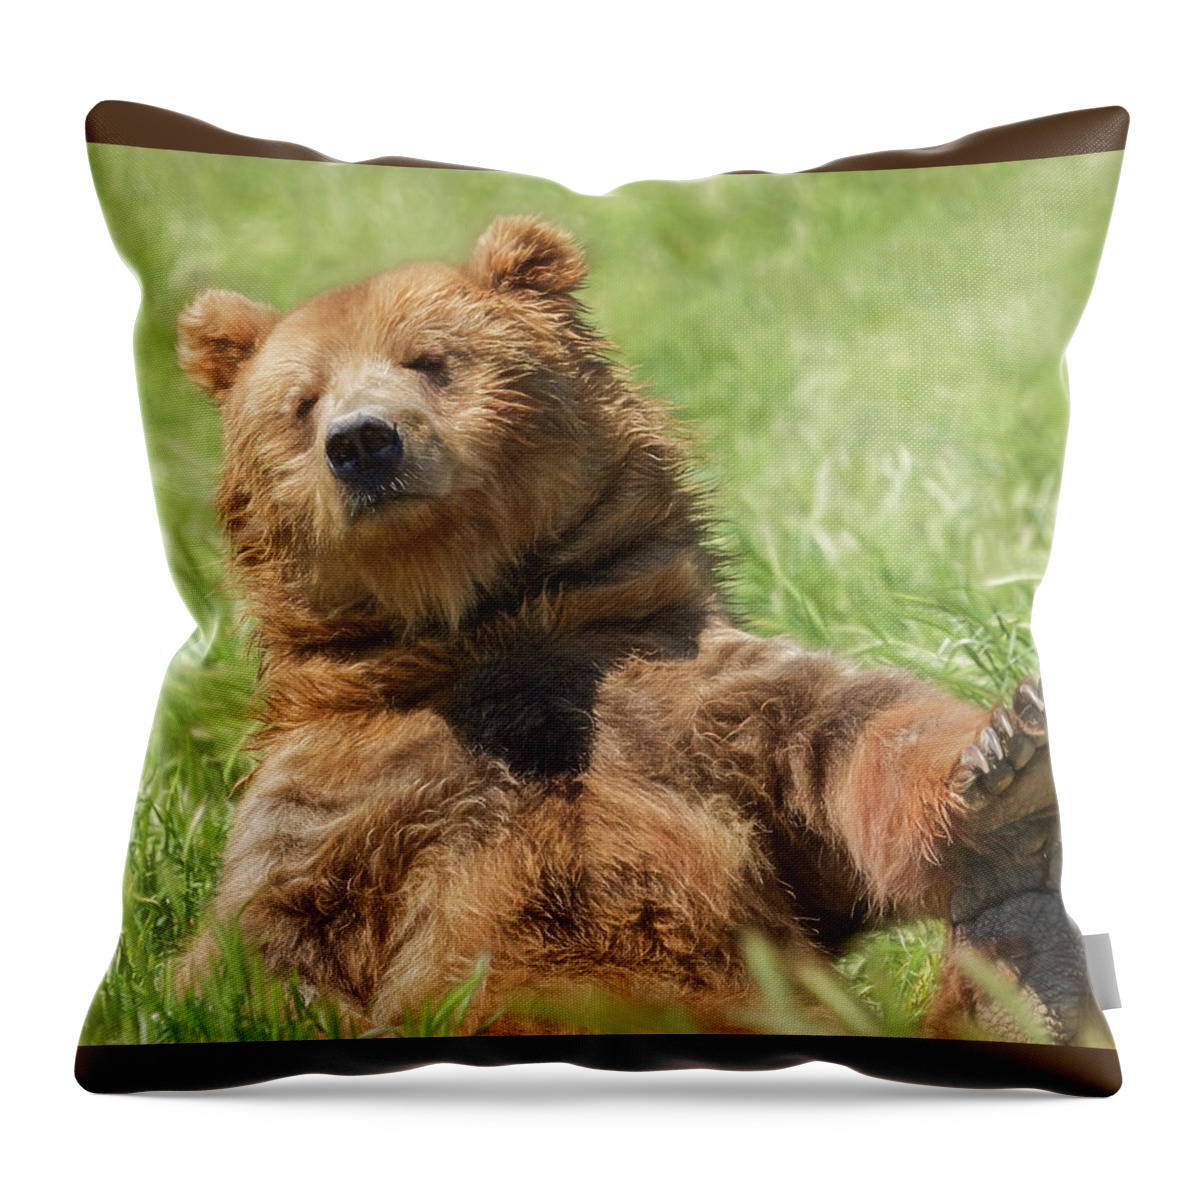 Boo Boo Bear Throw Pillow featuring the photograph Boo Boo Bear by Wes and Dotty Weber